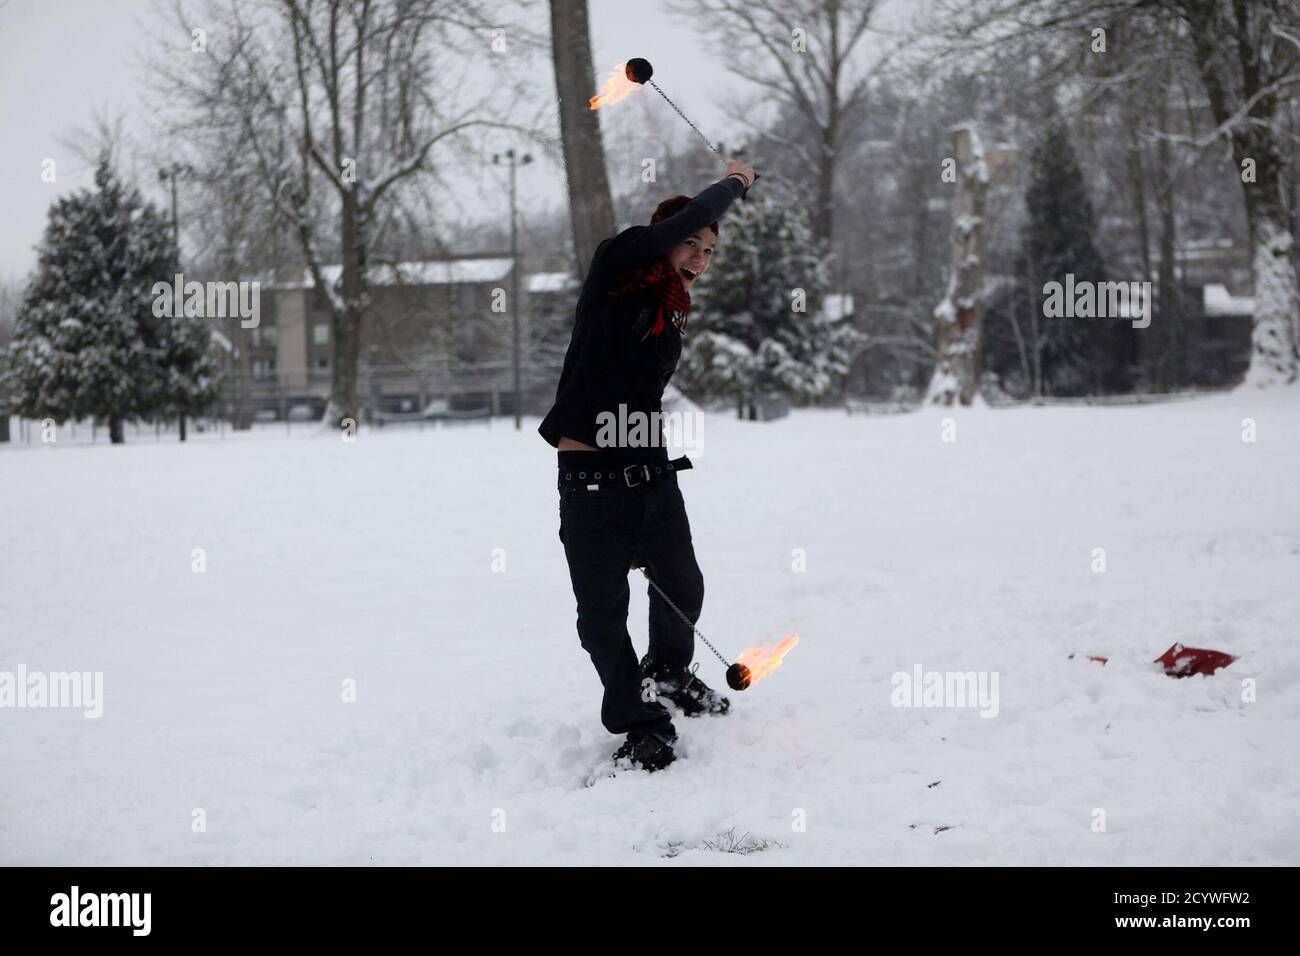 Keenan Pischke Practices Fire Poi In Kirkland Washington January 18 12 Seattle Area Residents On Tuesday Braced For An Epic Storm Expected To Drop Up To 10 Inches Of Snow And Nicknamed